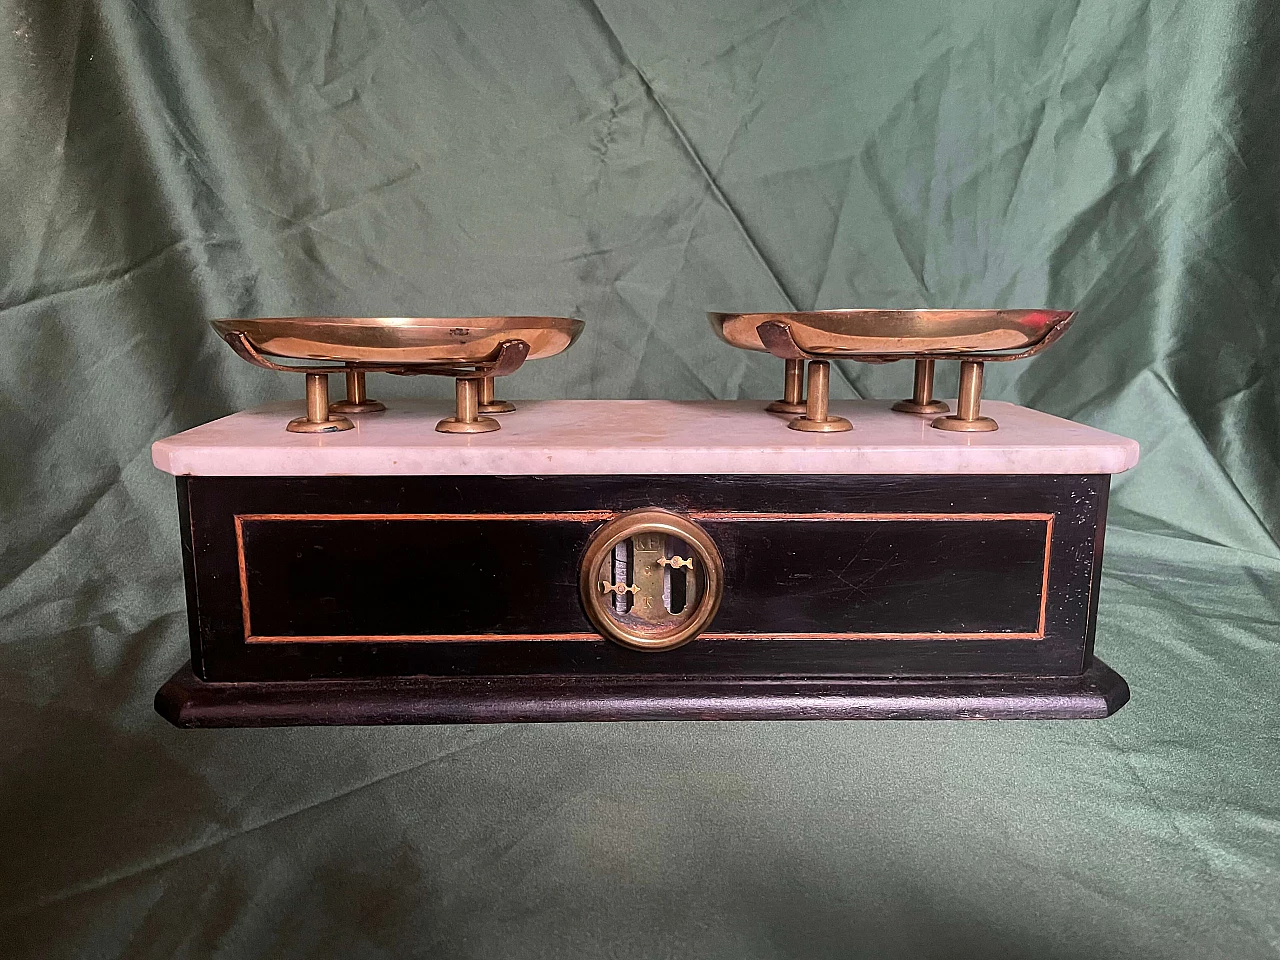 Two-plate scales made of brass, wood and marble, 1920s 1